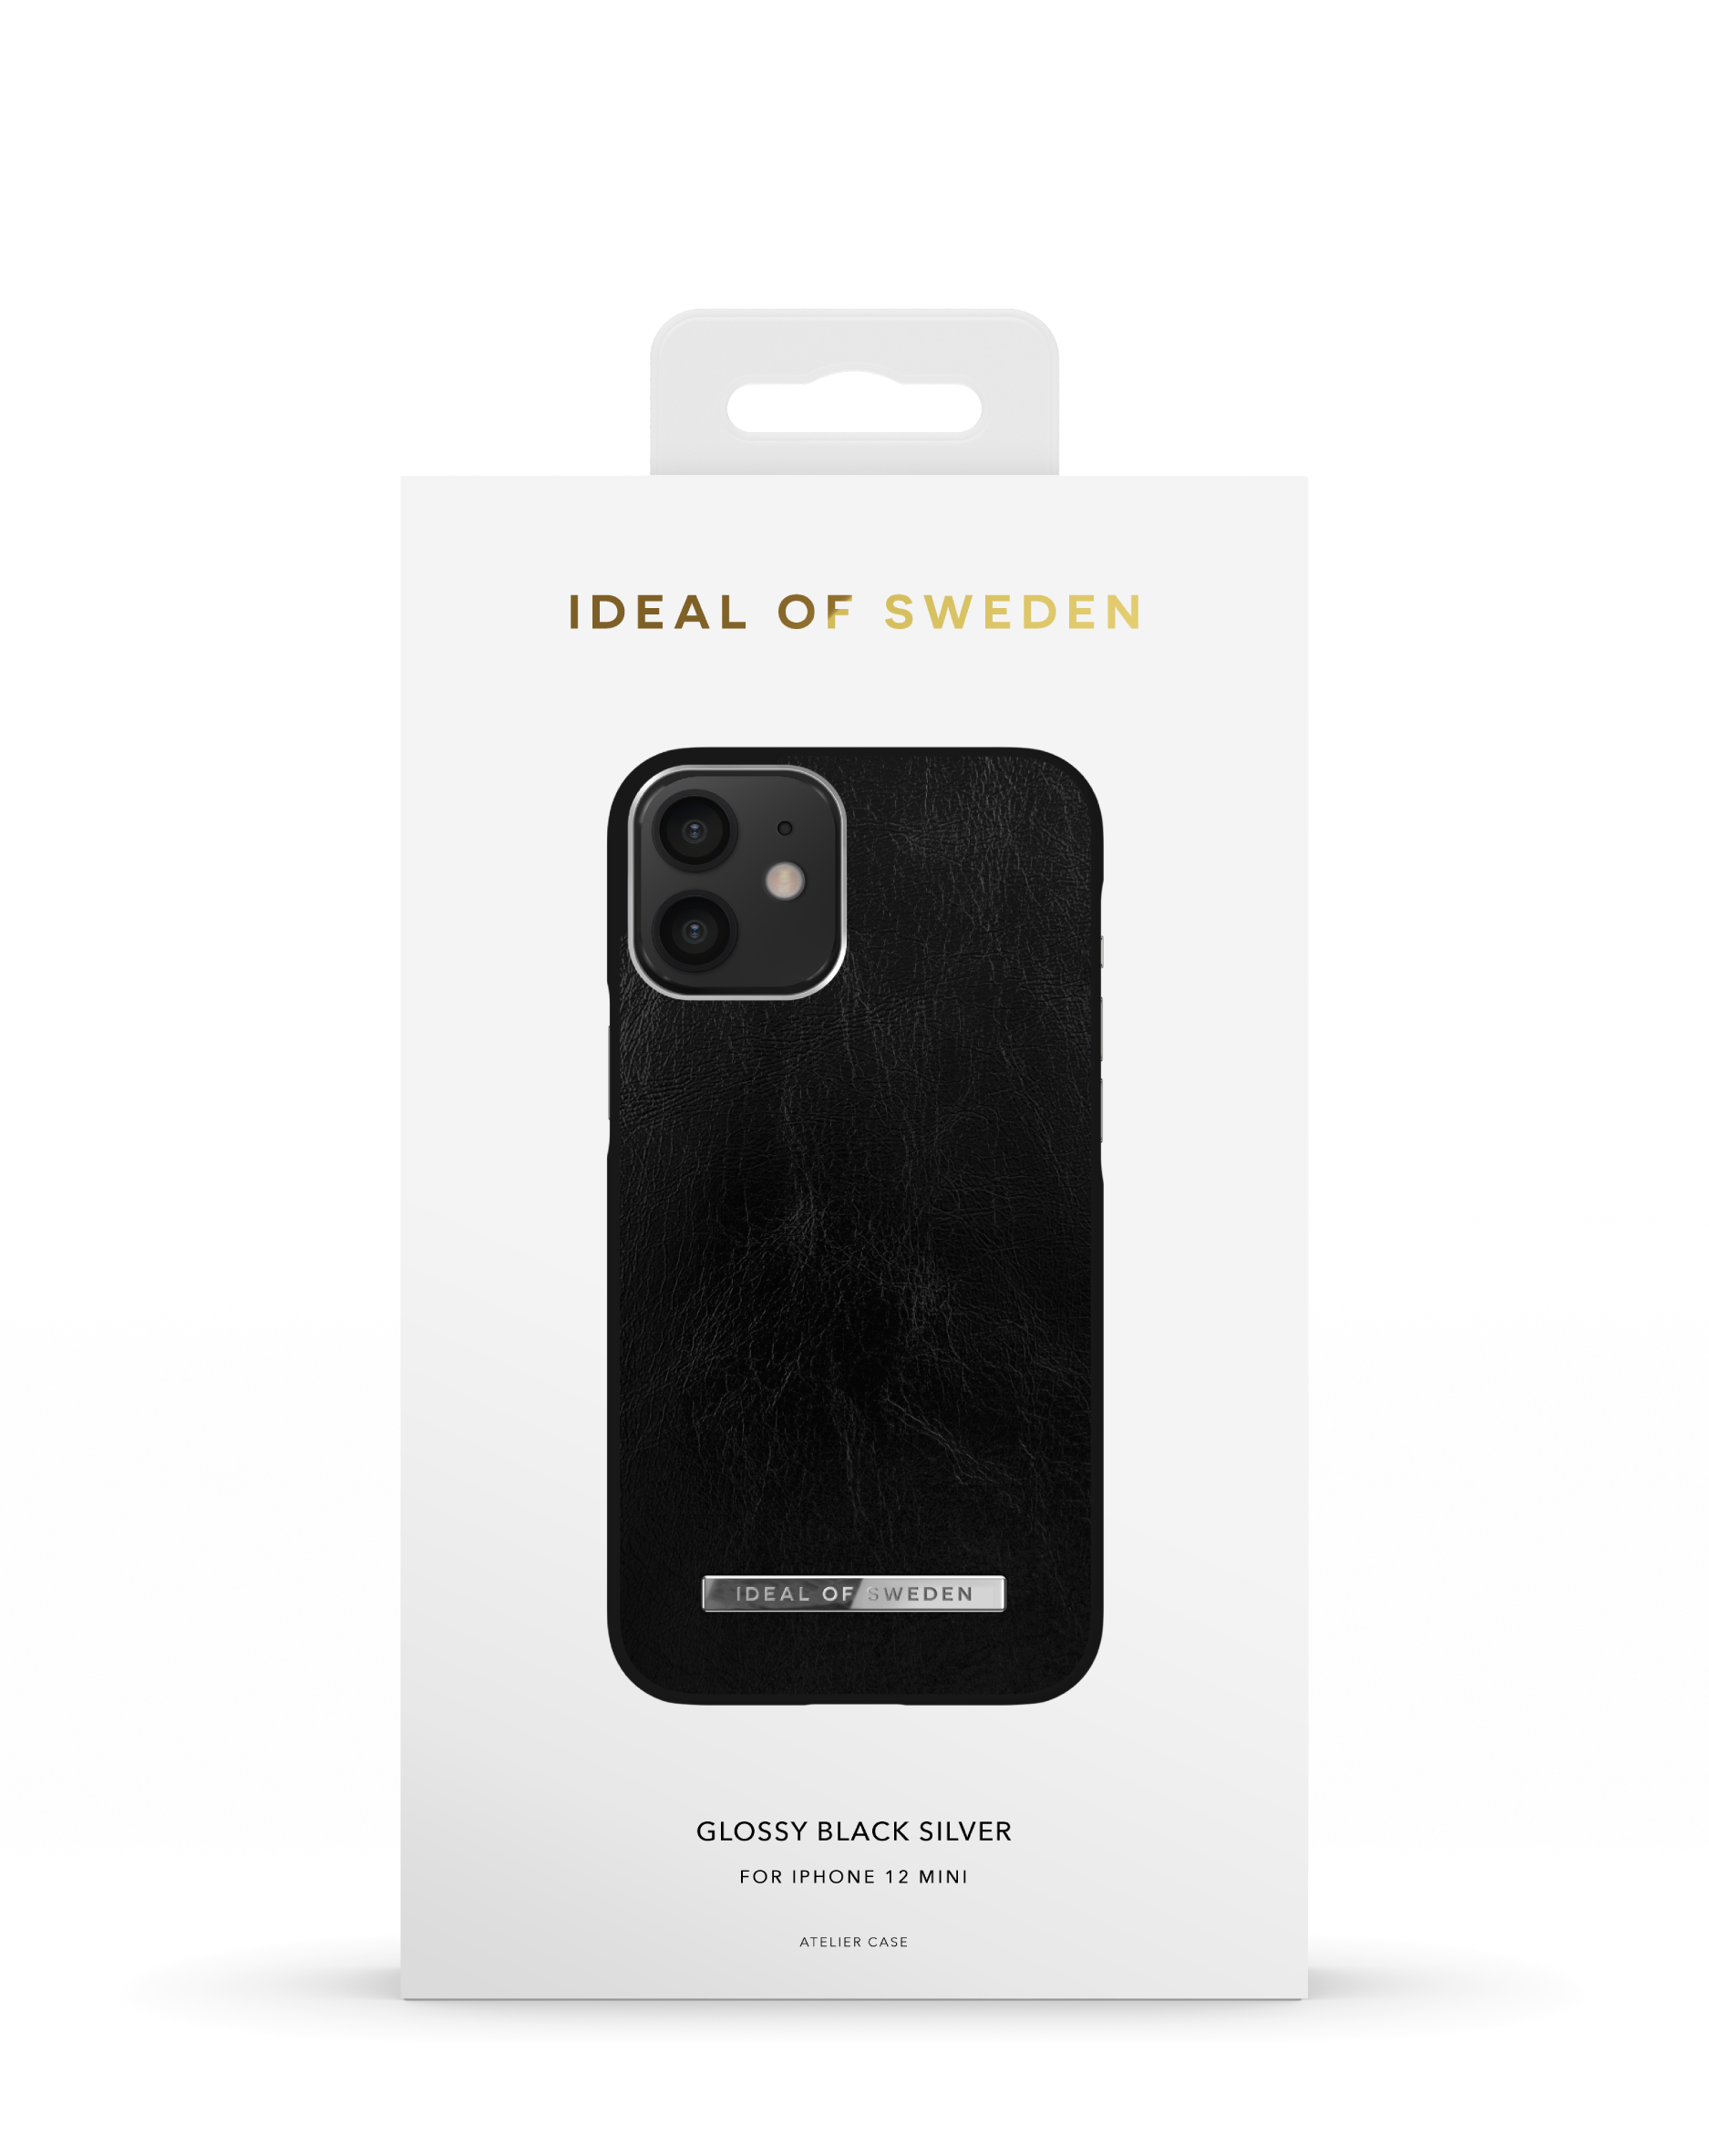 SWEDEN OF IPhone IDEAL 12 Glossy IDACSS21-I2054-311, Black mini, Apple, Silver Backcover,